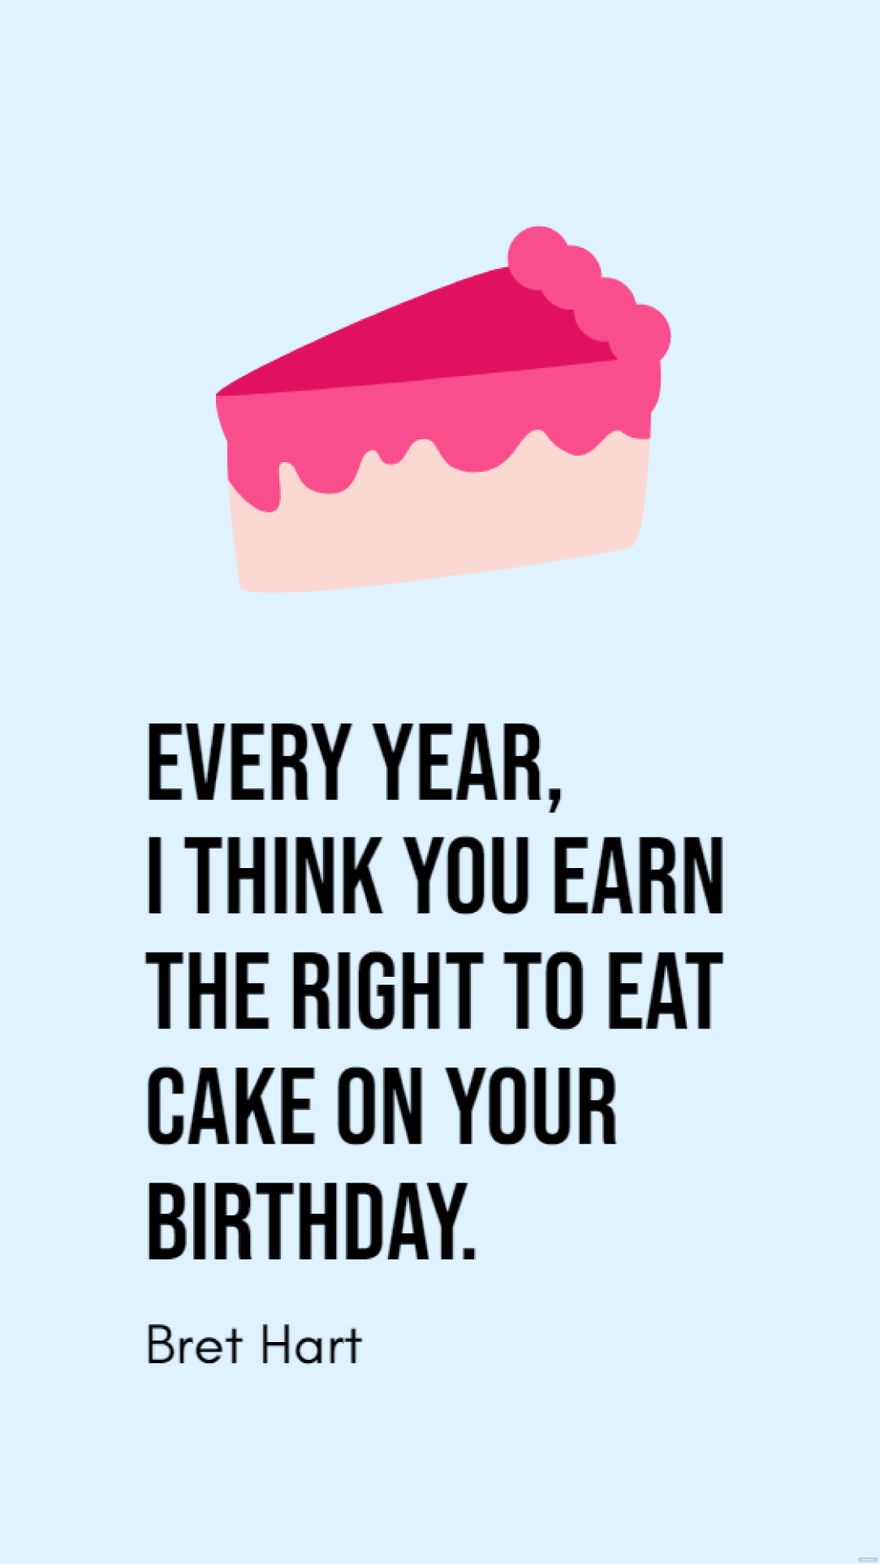 Free Bret Hart - Every year, I think you earn the right to eat cake on your birthday. in JPG